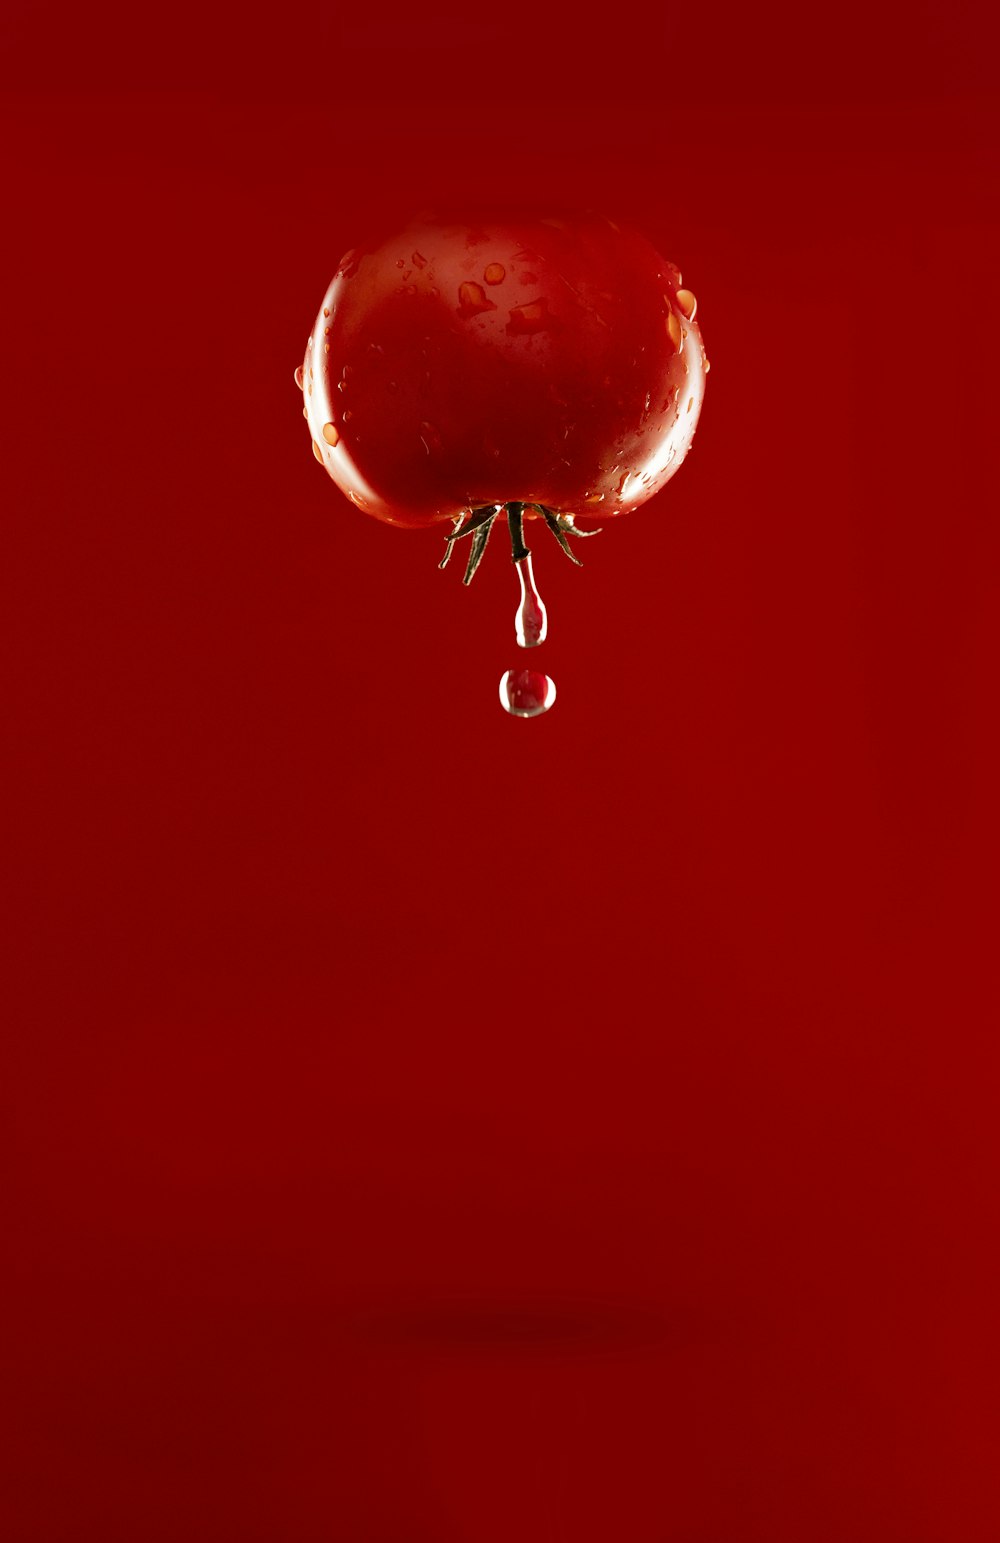 red tomato with water dew